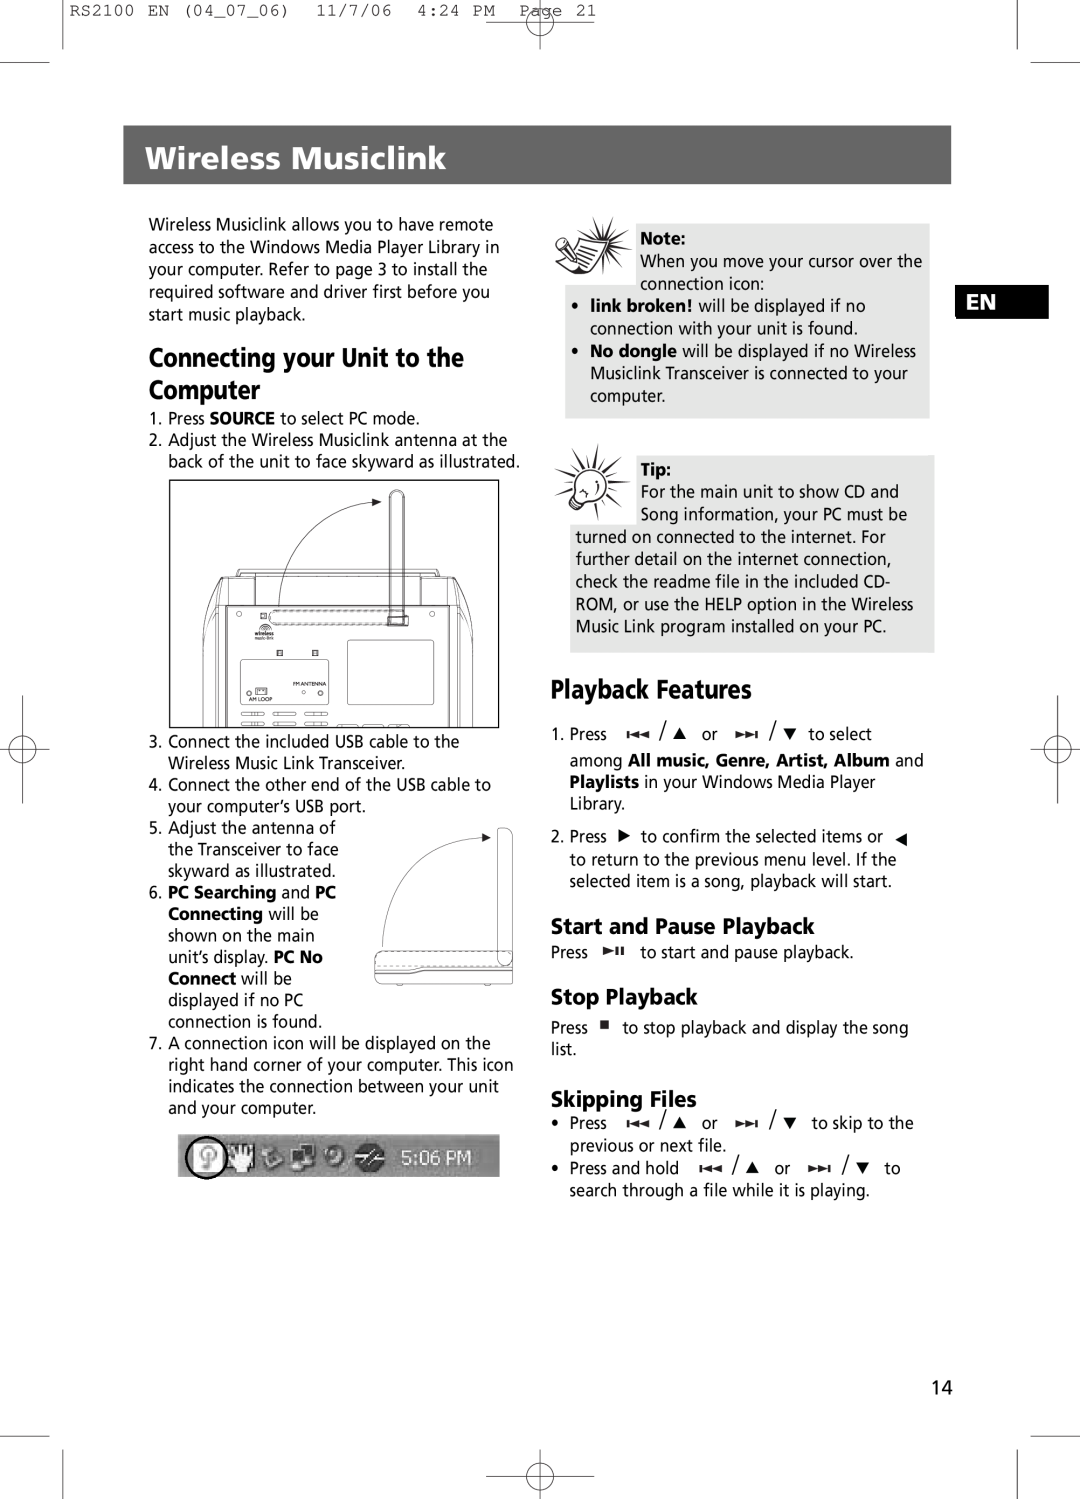 RCA RS2100 user manual Wireless Musiclink, Connecting your Unit to the Computer, Playback Features 